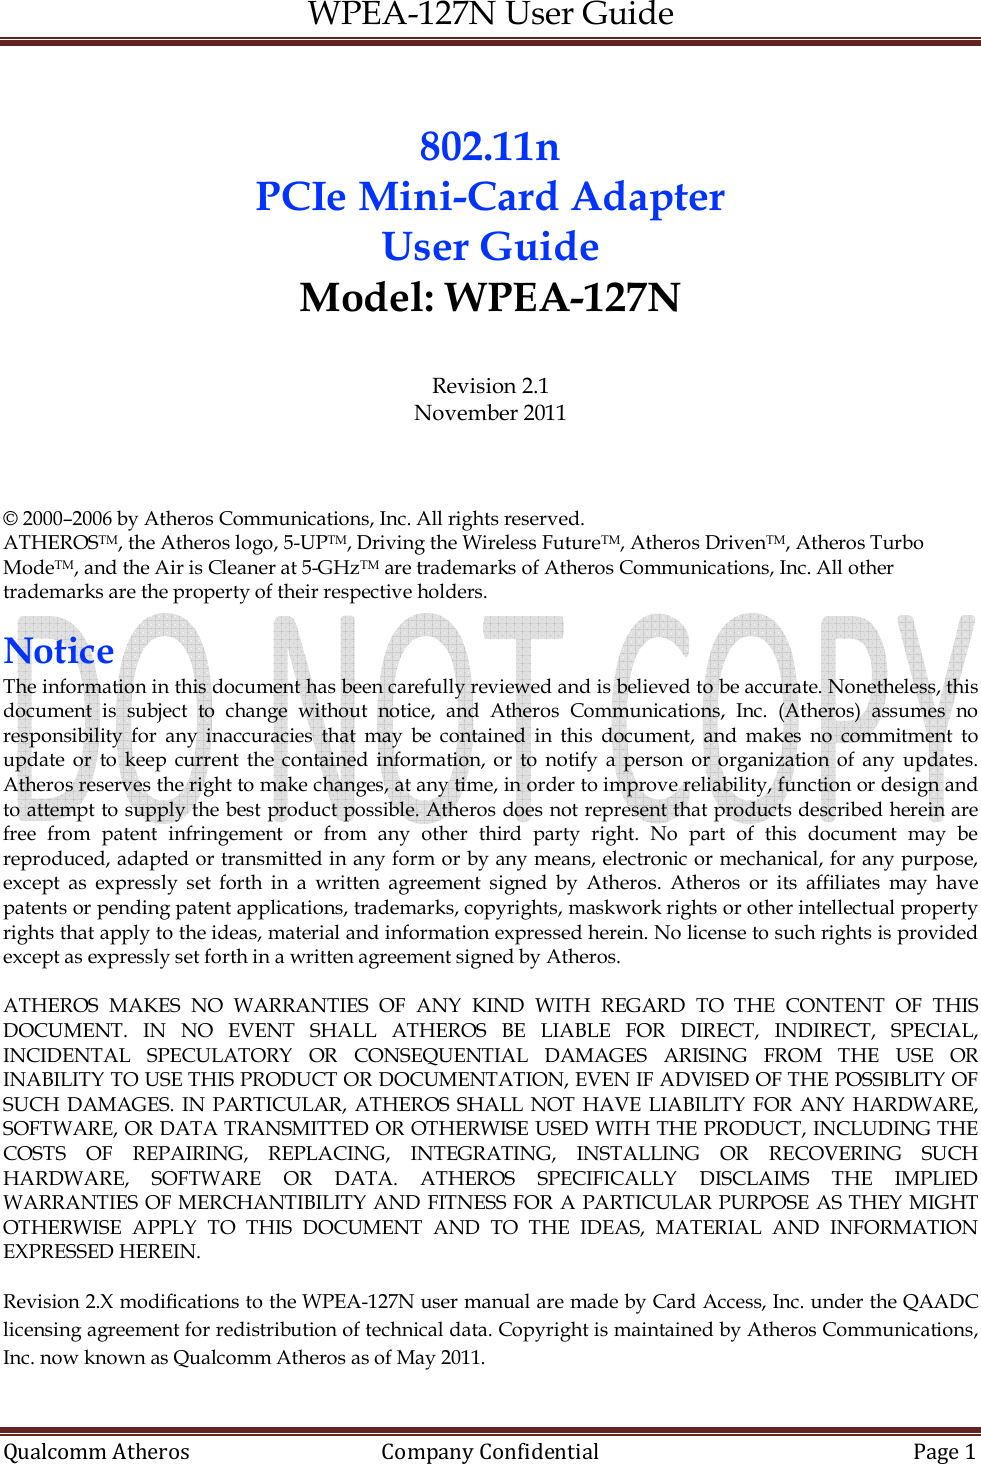 WPEA-127N User Guide  Qualcomm Atheros   Company Confidential  Page 1   802.11n  PCIe Mini-Card Adapter  User Guide Model: WPEA-127N  Revision 2.1 November 2011    © 2000–2006 by Atheros Communications, Inc. All rights reserved. ATHEROSTM, the Atheros logo, 5-UPTM, Driving the Wireless FutureTM, Atheros DrivenTM, Atheros Turbo ModeTM, and the Air is Cleaner at 5-GHzTM are trademarks of Atheros Communications, Inc. All other trademarks are the property of their respective holders.  Notice The information in this document has been carefully reviewed and is believed to be accurate. Nonetheless, this document  is  subject  to  change  without  notice,  and  Atheros  Communications,  Inc.  (Atheros)  assumes  no responsibility  for  any  inaccuracies  that  may  be  contained  in  this  document,  and  makes  no  commitment  to update  or  to  keep  current  the contained  information, or  to  notify  a  person  or  organization  of  any  updates. Atheros reserves the right to make changes, at any time, in order to improve reliability, function or design and to attempt to supply the best product possible. Atheros does not represent that products described herein are free  from  patent  infringement  or  from  any  other  third  party  right.  No  part  of  this  document  may  be reproduced, adapted or transmitted in any form or by any means, electronic or mechanical, for any purpose, except  as  expressly  set  forth  in  a  written  agreement  signed  by  Atheros.  Atheros  or  its  affiliates  may  have patents or pending patent applications, trademarks, copyrights, maskwork rights or other intellectual property rights that apply to the ideas, material and information expressed herein. No license to such rights is provided except as expressly set forth in a written agreement signed by Atheros.  ATHEROS  MAKES  NO  WARRANTIES  OF  ANY  KIND  WITH  REGARD  TO  THE  CONTENT  OF  THIS DOCUMENT.  IN  NO  EVENT  SHALL  ATHEROS  BE  LIABLE  FOR  DIRECT,  INDIRECT,  SPECIAL, INCIDENTAL  SPECULATORY  OR  CONSEQUENTIAL  DAMAGES  ARISING  FROM  THE  USE  OR INABILITY TO USE THIS PRODUCT OR DOCUMENTATION, EVEN IF ADVISED OF THE POSSIBLITY OF SUCH DAMAGES. IN  PARTICULAR, ATHEROS SHALL NOT HAVE LIABILITY  FOR ANY  HARDWARE, SOFTWARE, OR DATA TRANSMITTED OR OTHERWISE USED WITH THE PRODUCT, INCLUDING THE COSTS  OF  REPAIRING,  REPLACING,  INTEGRATING,  INSTALLING  OR  RECOVERING  SUCH HARDWARE,  SOFTWARE  OR  DATA.  ATHEROS  SPECIFICALLY  DISCLAIMS  THE  IMPLIED WARRANTIES OF MERCHANTIBILITY AND FITNESS FOR A PARTICULAR PURPOSE AS THEY MIGHT OTHERWISE  APPLY  TO  THIS  DOCUMENT  AND  TO  THE  IDEAS,  MATERIAL  AND  INFORMATION EXPRESSED HEREIN.  Revision 2.X modifications to the WPEA-127N user manual are made by Card Access, Inc. under the QAADC licensing agreement for redistribution of technical data. Copyright is maintained by Atheros Communications, Inc. now known as Qualcomm Atheros as of May 2011.    